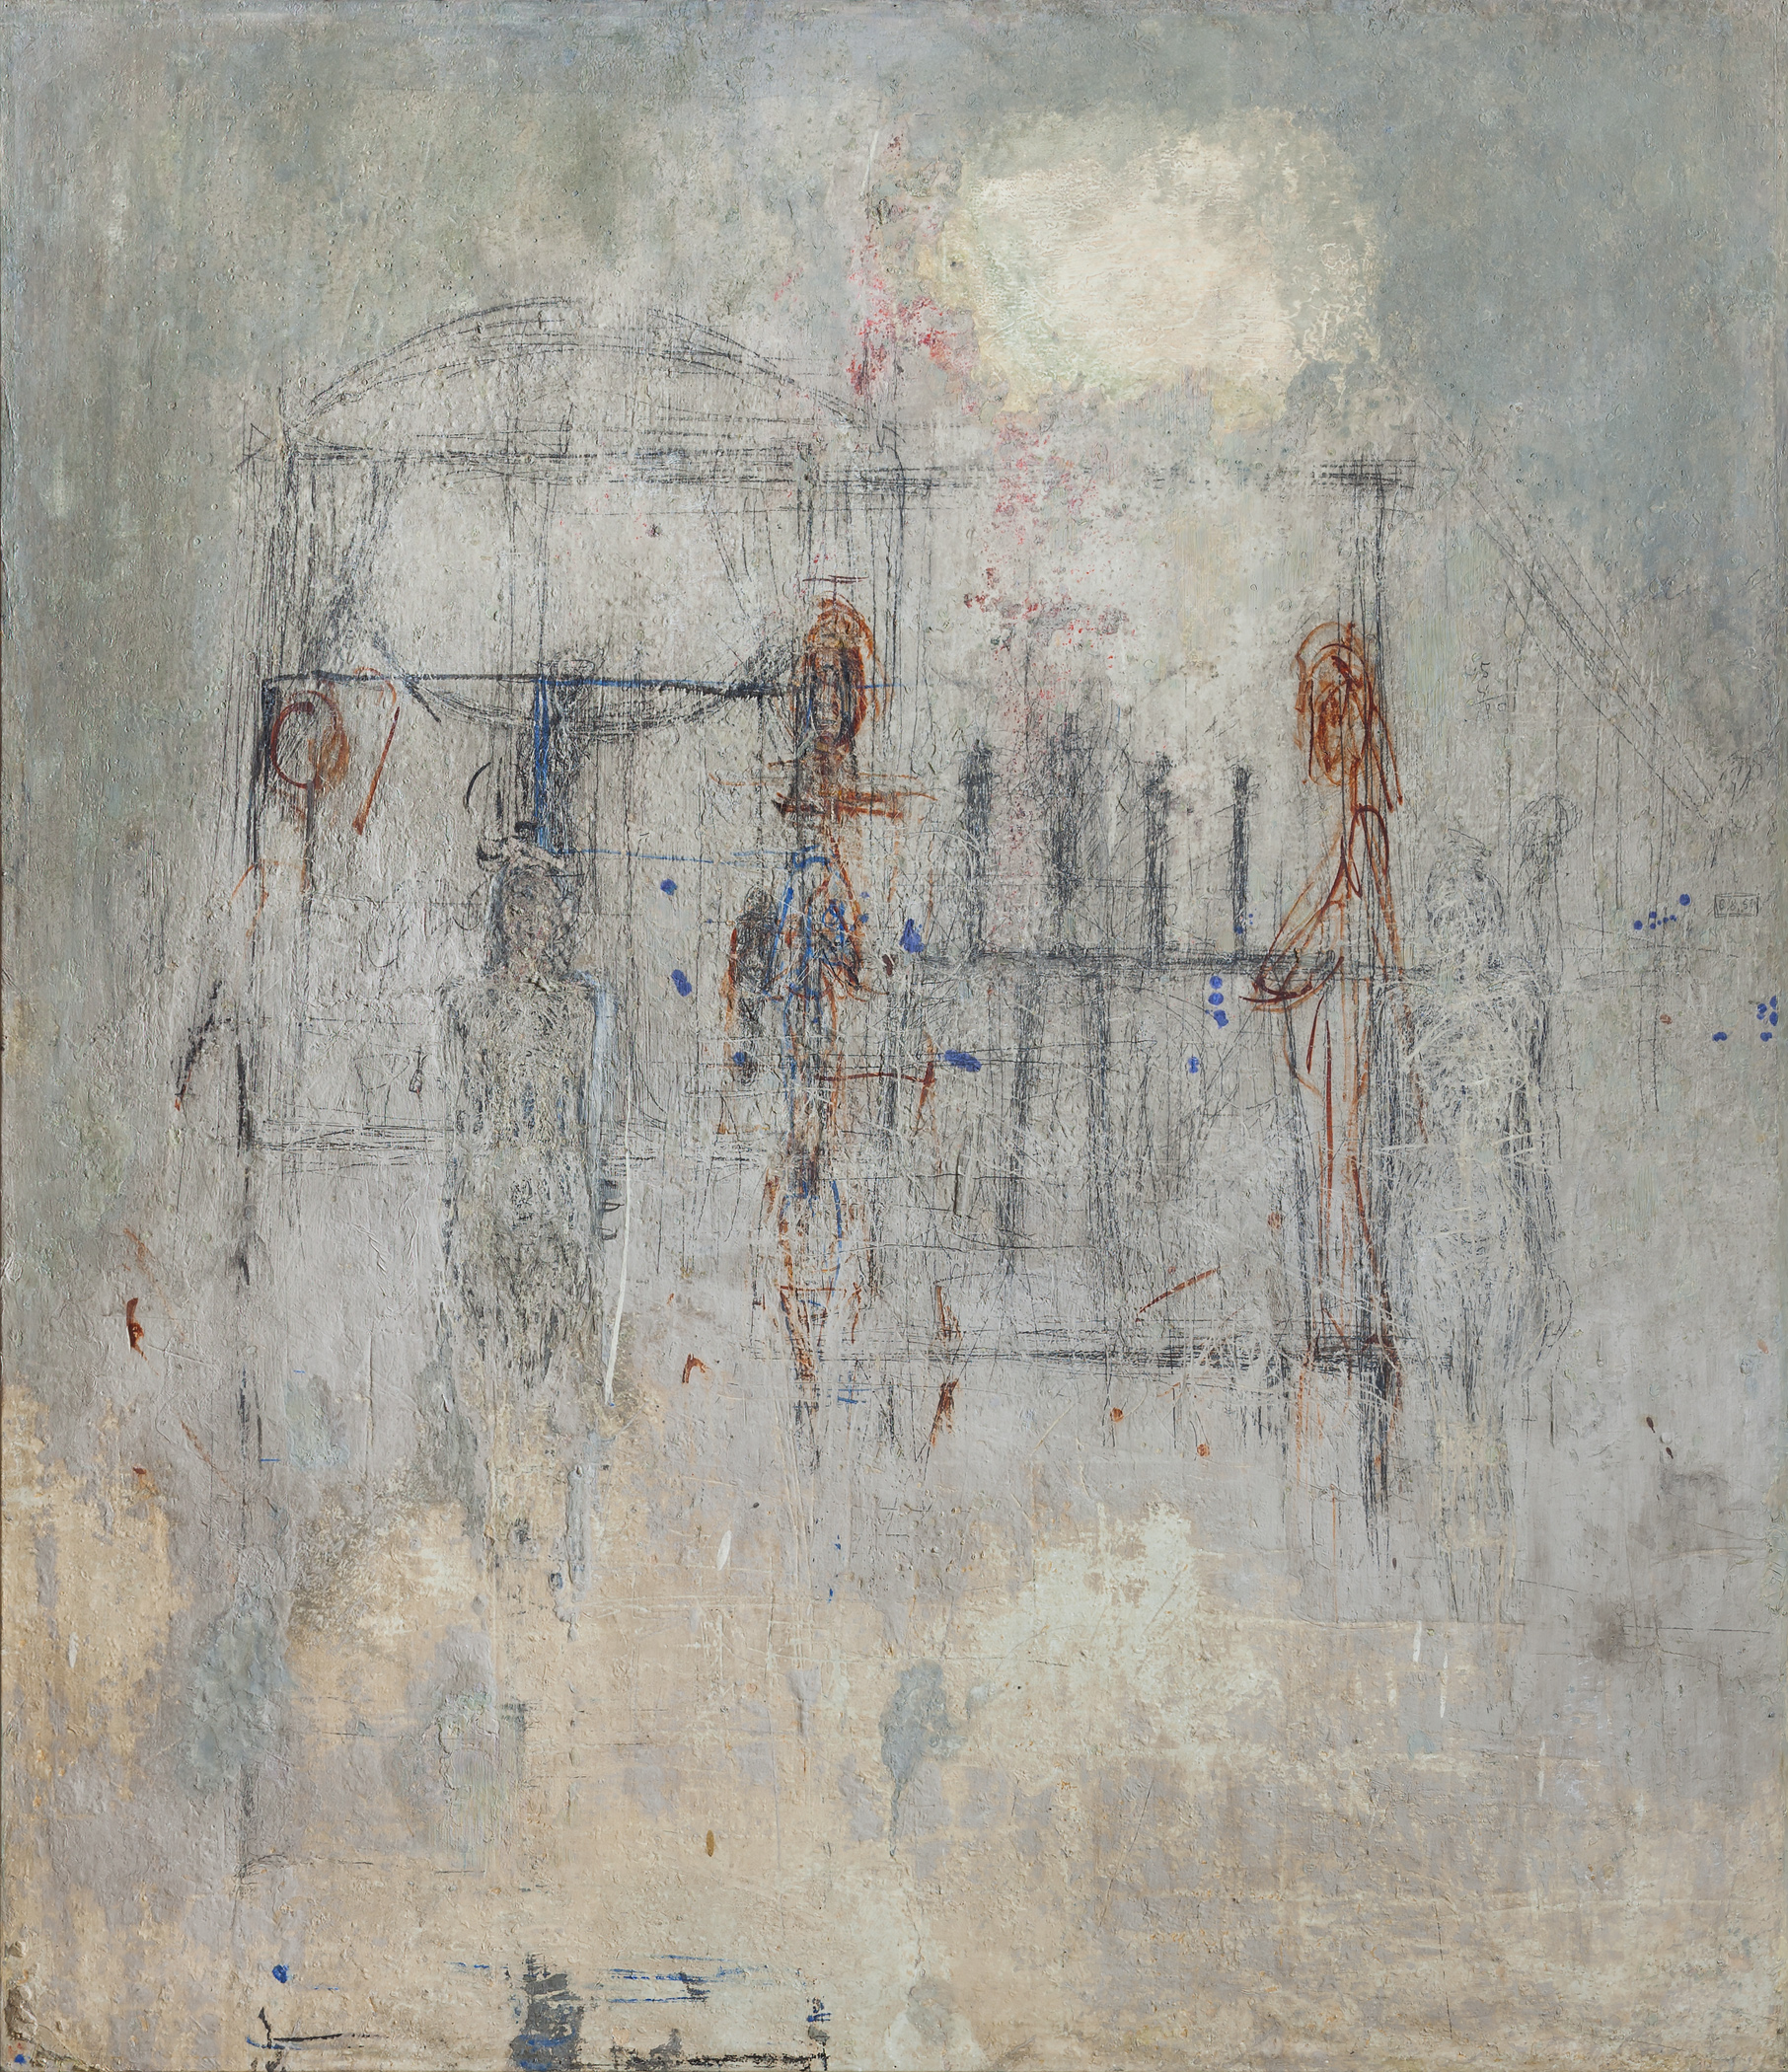 "Studies for The Cage (first version), Four Figurines on a Stand, The Chariot (facing and in profile)," 1949–50. Alberto Giacometti (Swiss, 1901–1966). Fragment of a wall painting; 125 x 107.3 x 2.4 cm. Fondation Giacometti. © Estate of Alberto Giacometti / Artists Rights Society (ARS), New York